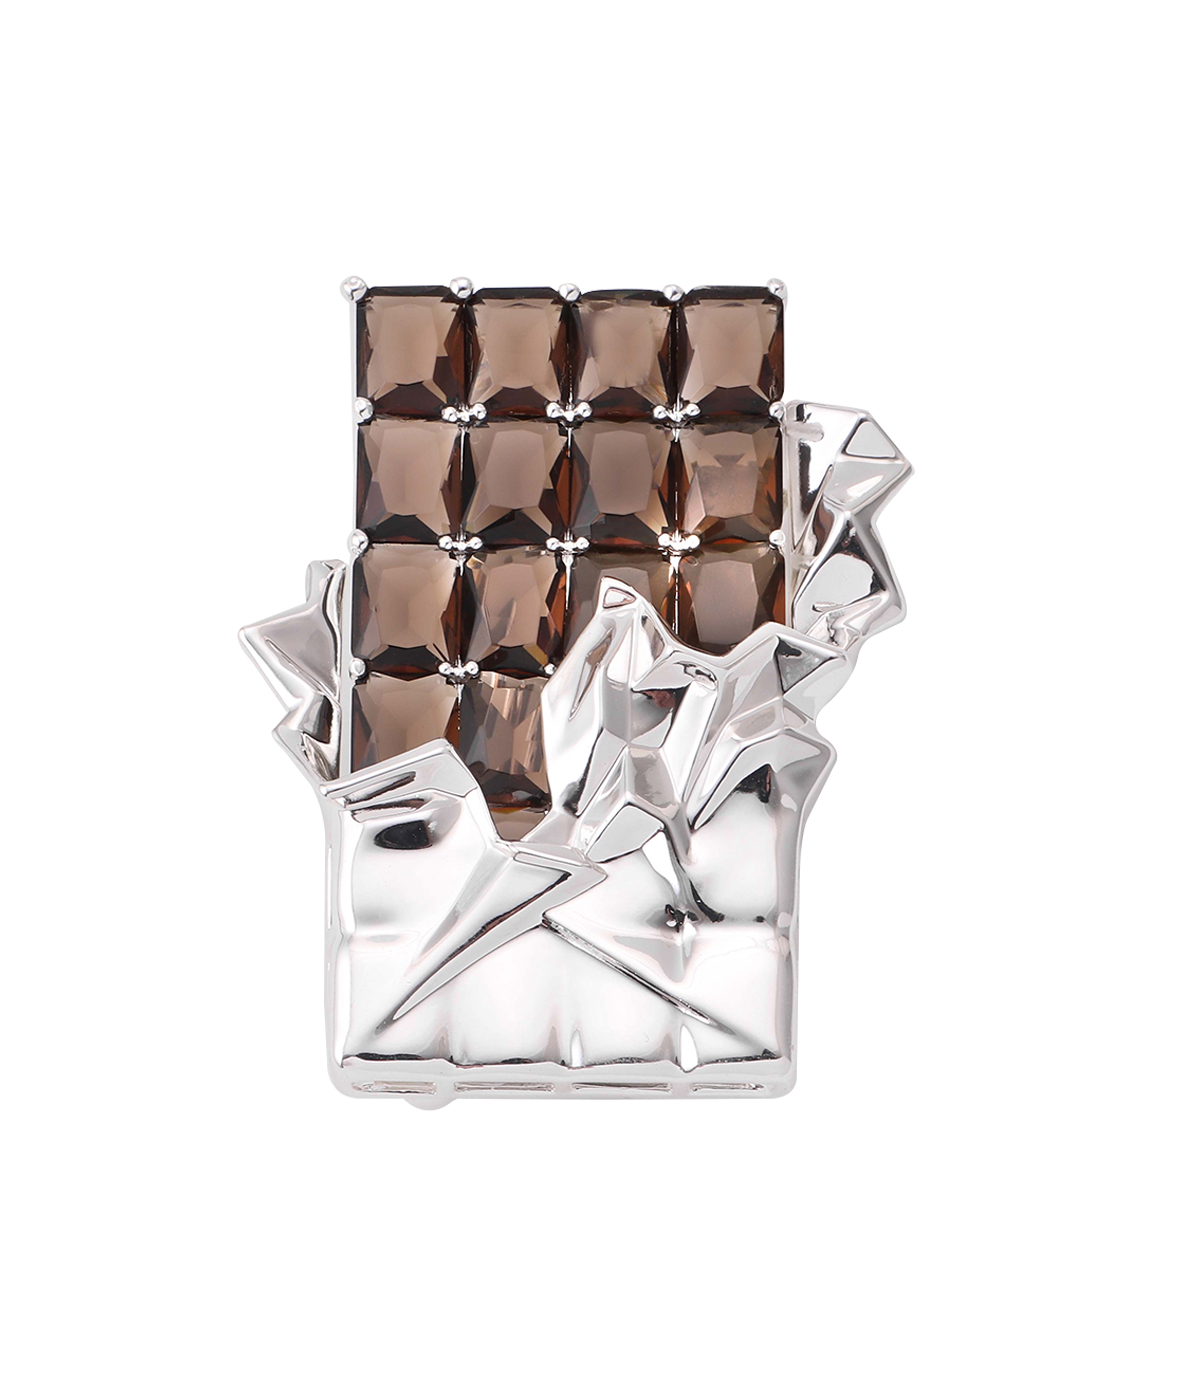 Chocolate brooch -latest BROOCH,Brooches & Pins design 2021